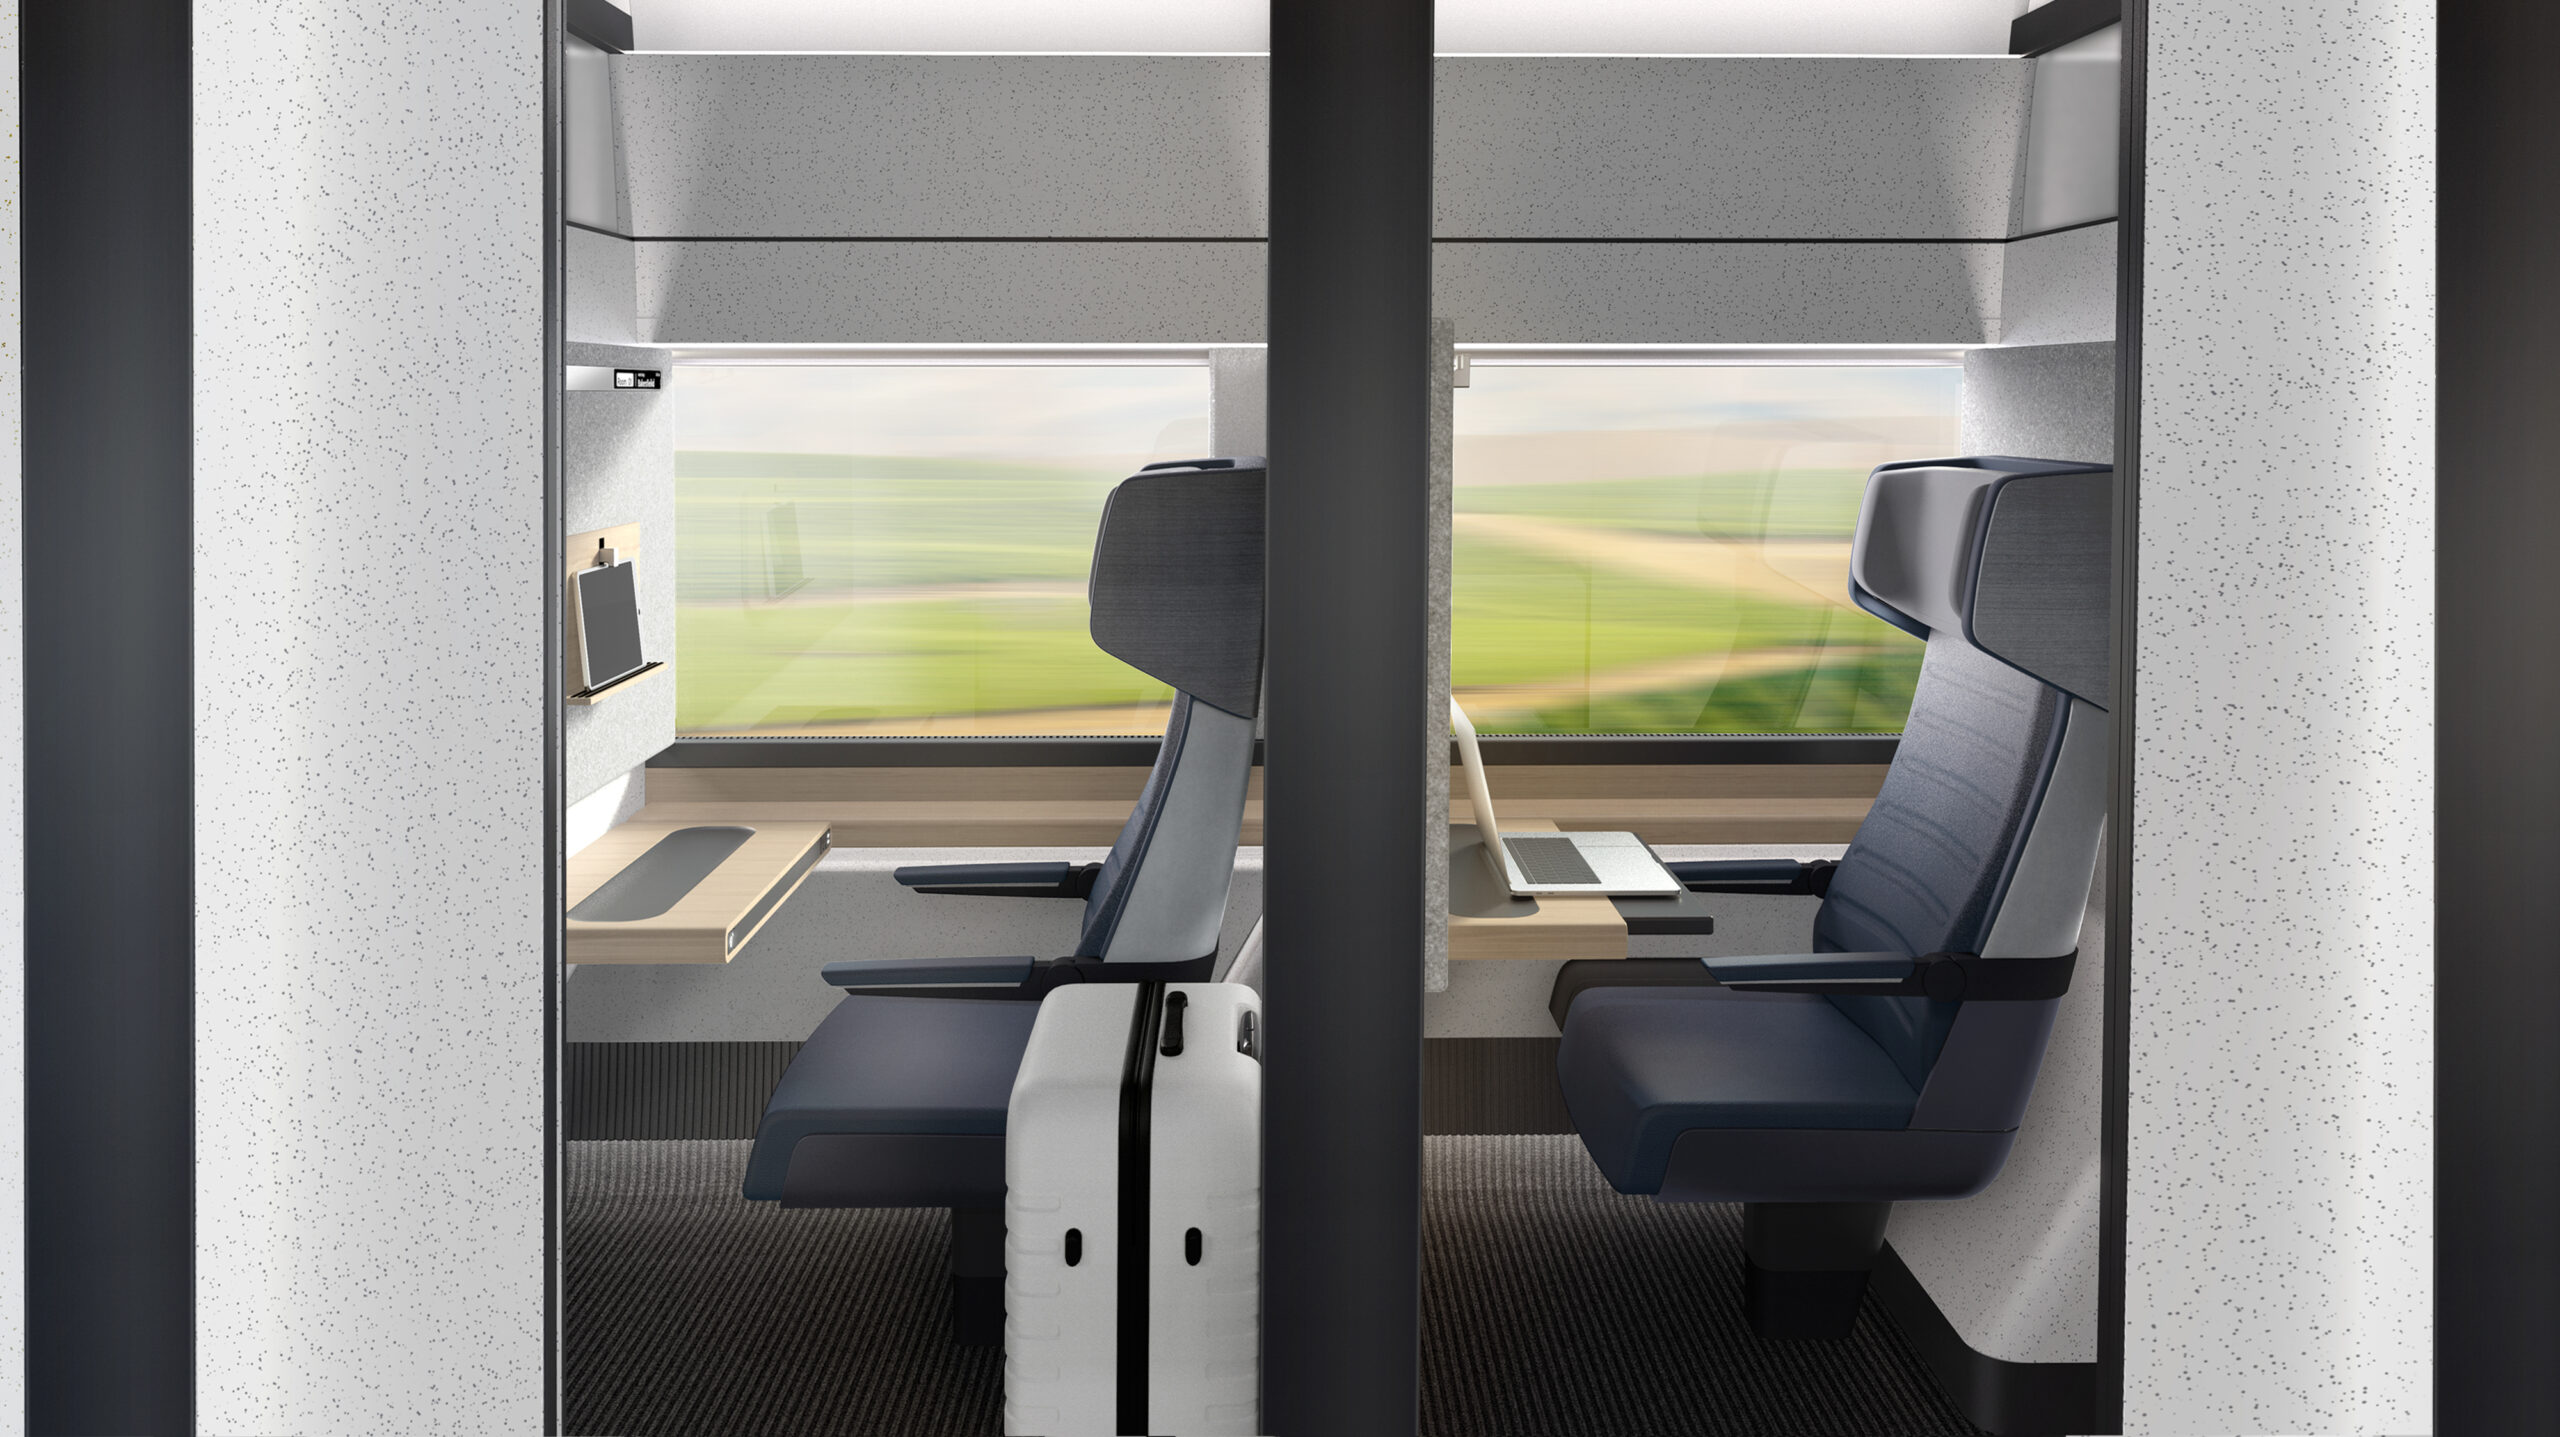 A preliminary rendering of Compartment seating  